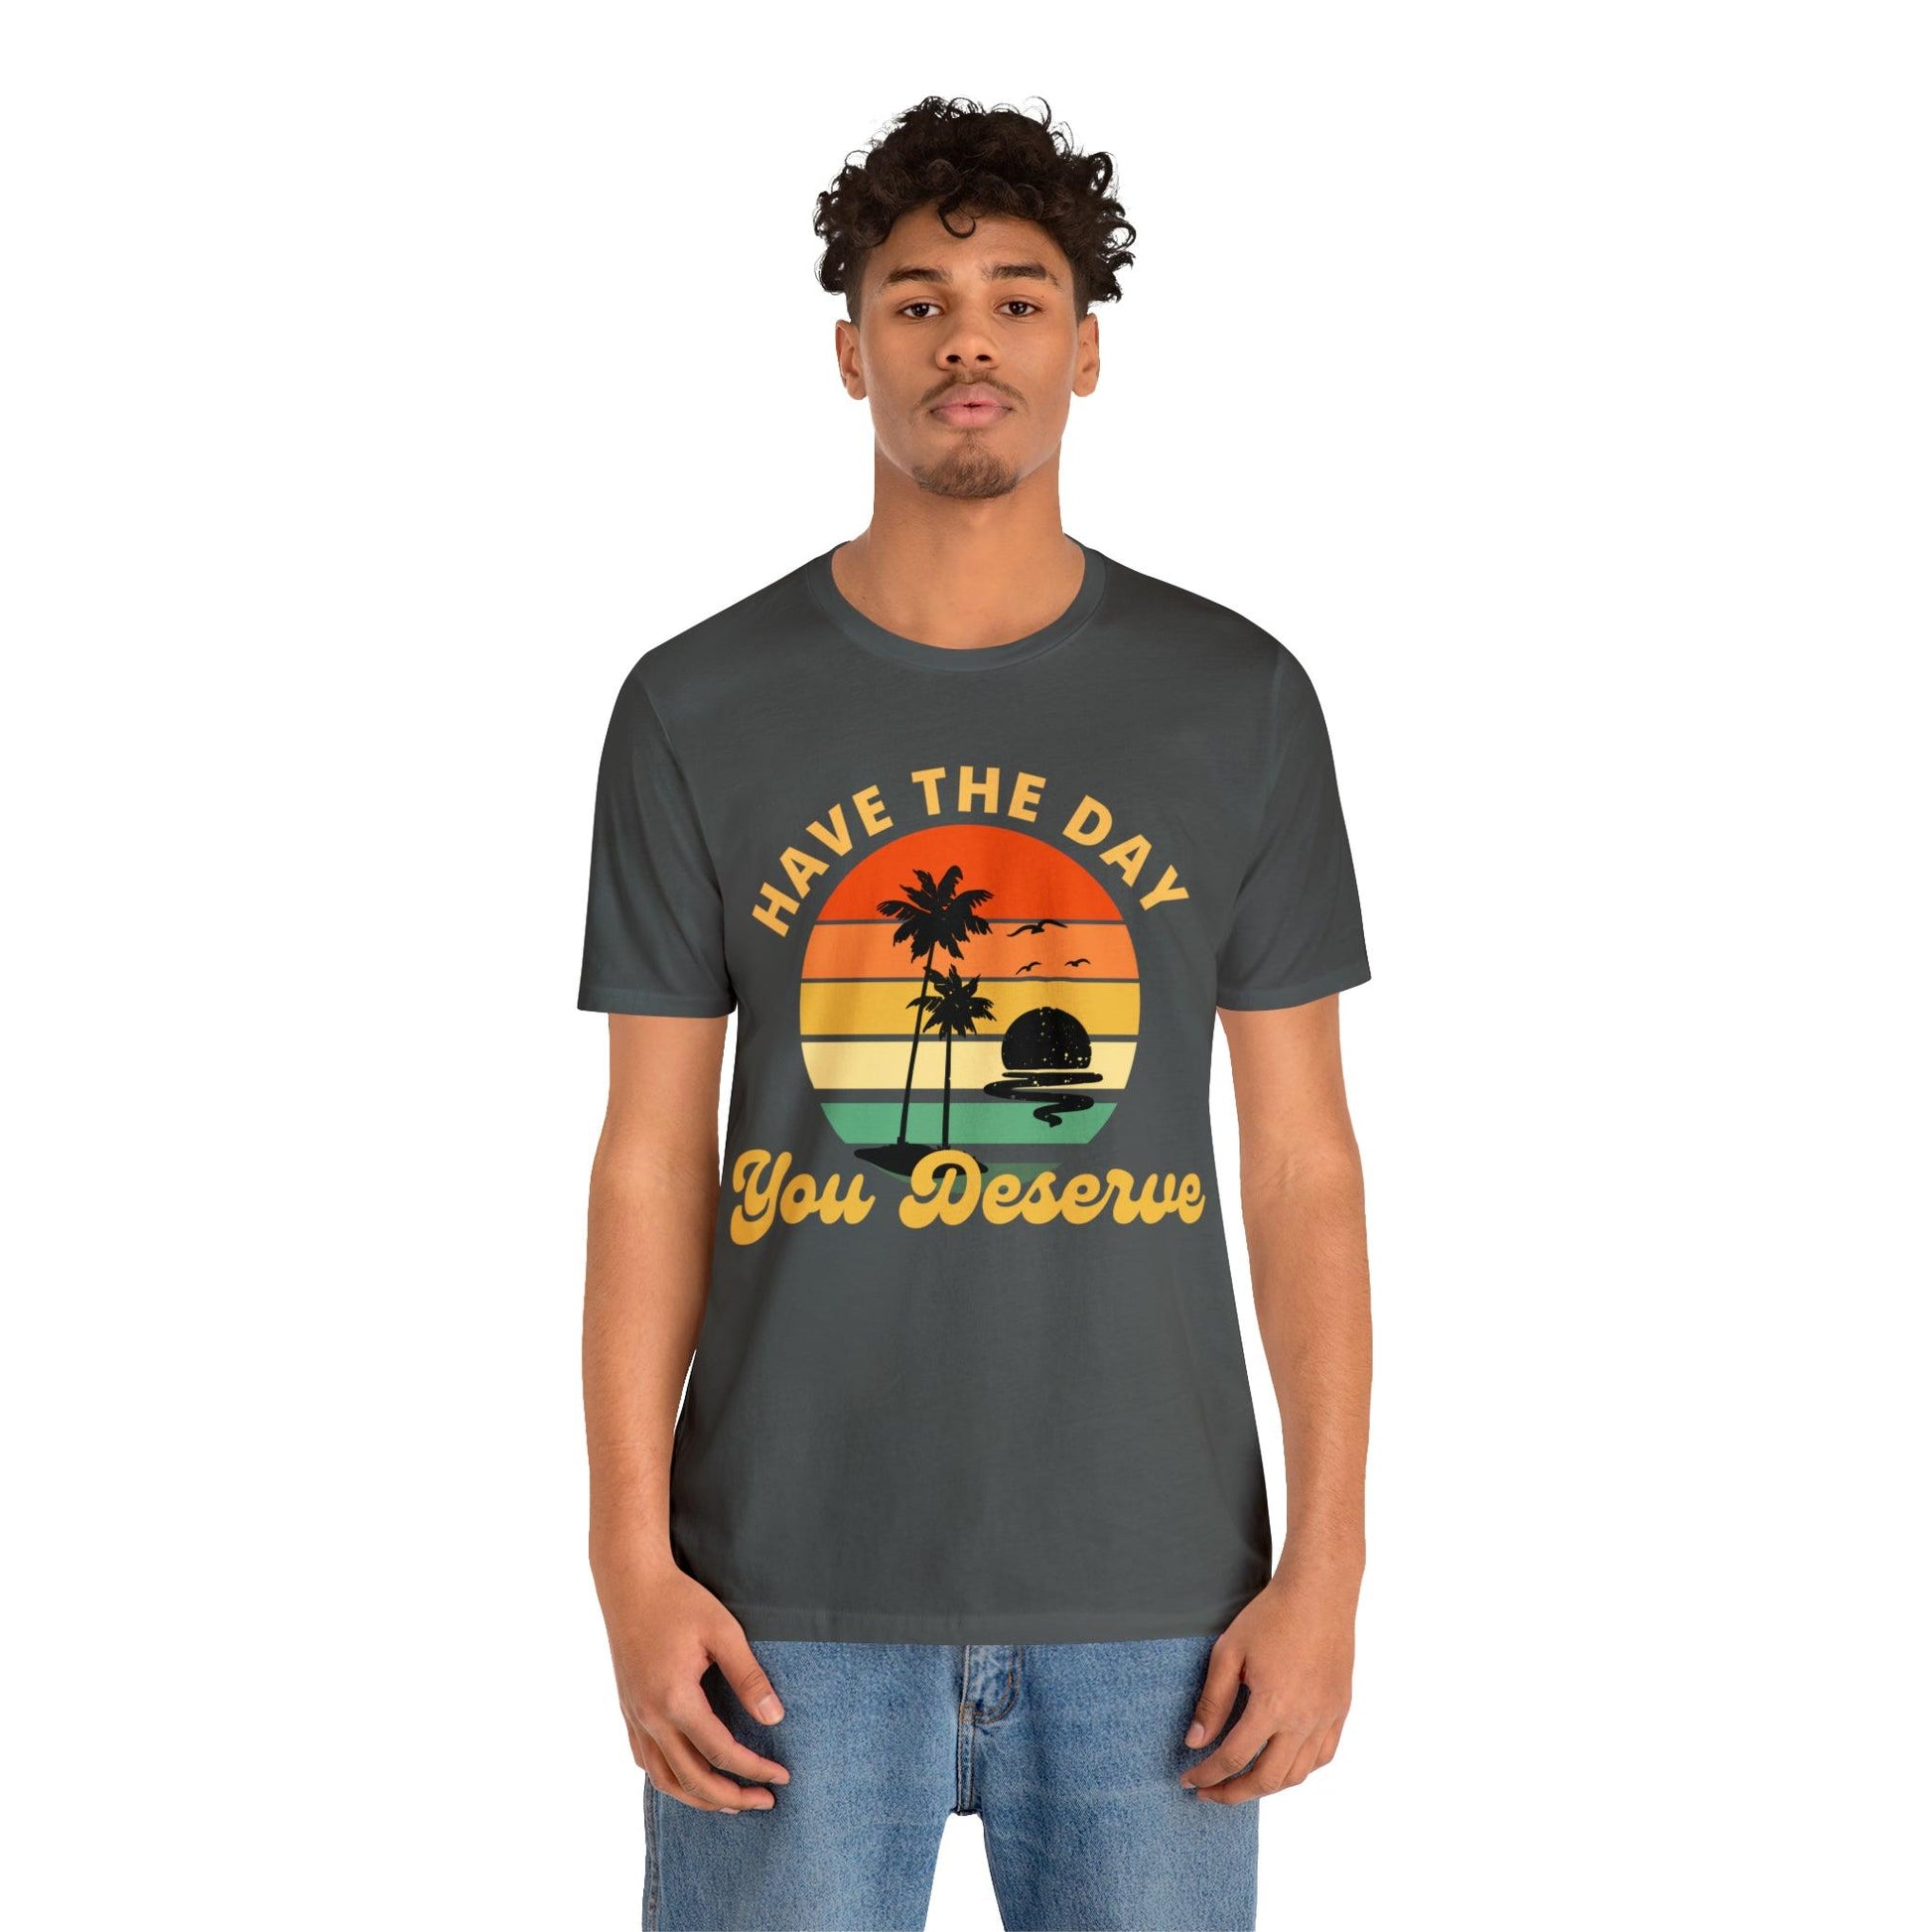 Have the Day You Deserve T-Shirt, Inspirational Graphic Tee, Motivational Tee, Positive Vibes Shirt, Trendy shirt and Eye Catching shirt - Giftsmojo